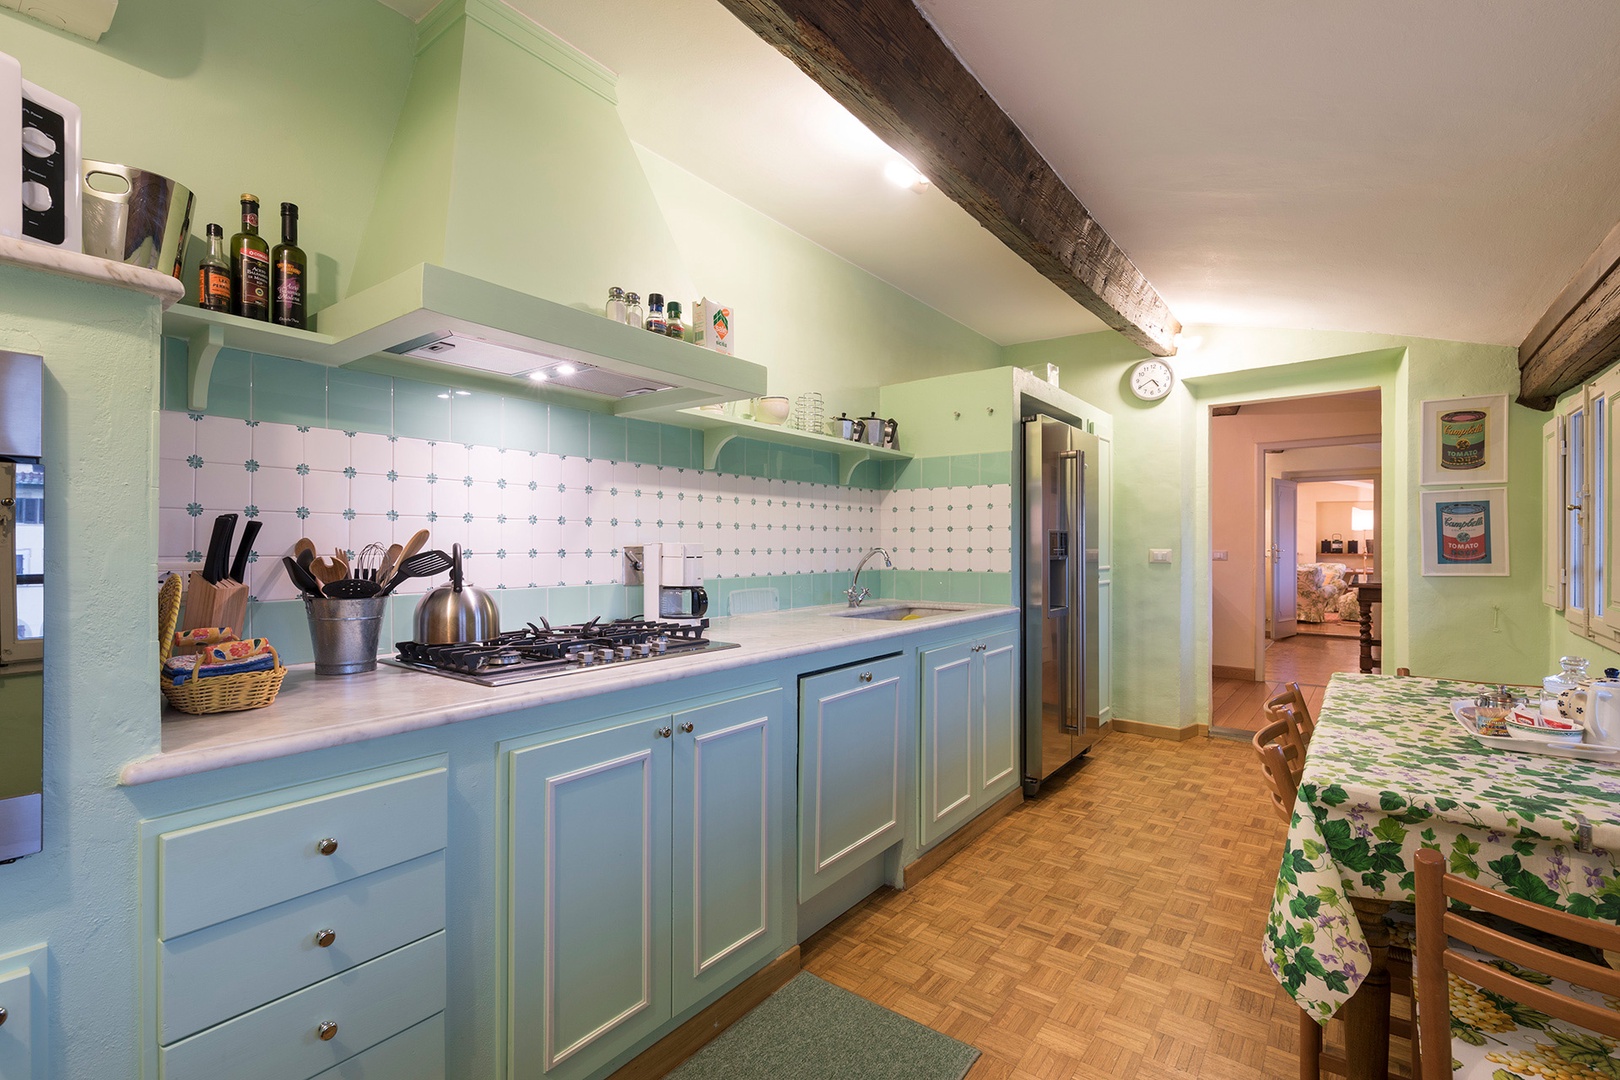 Kitchen is bright and cheerful and fully equipped with pots, pans, dishes.